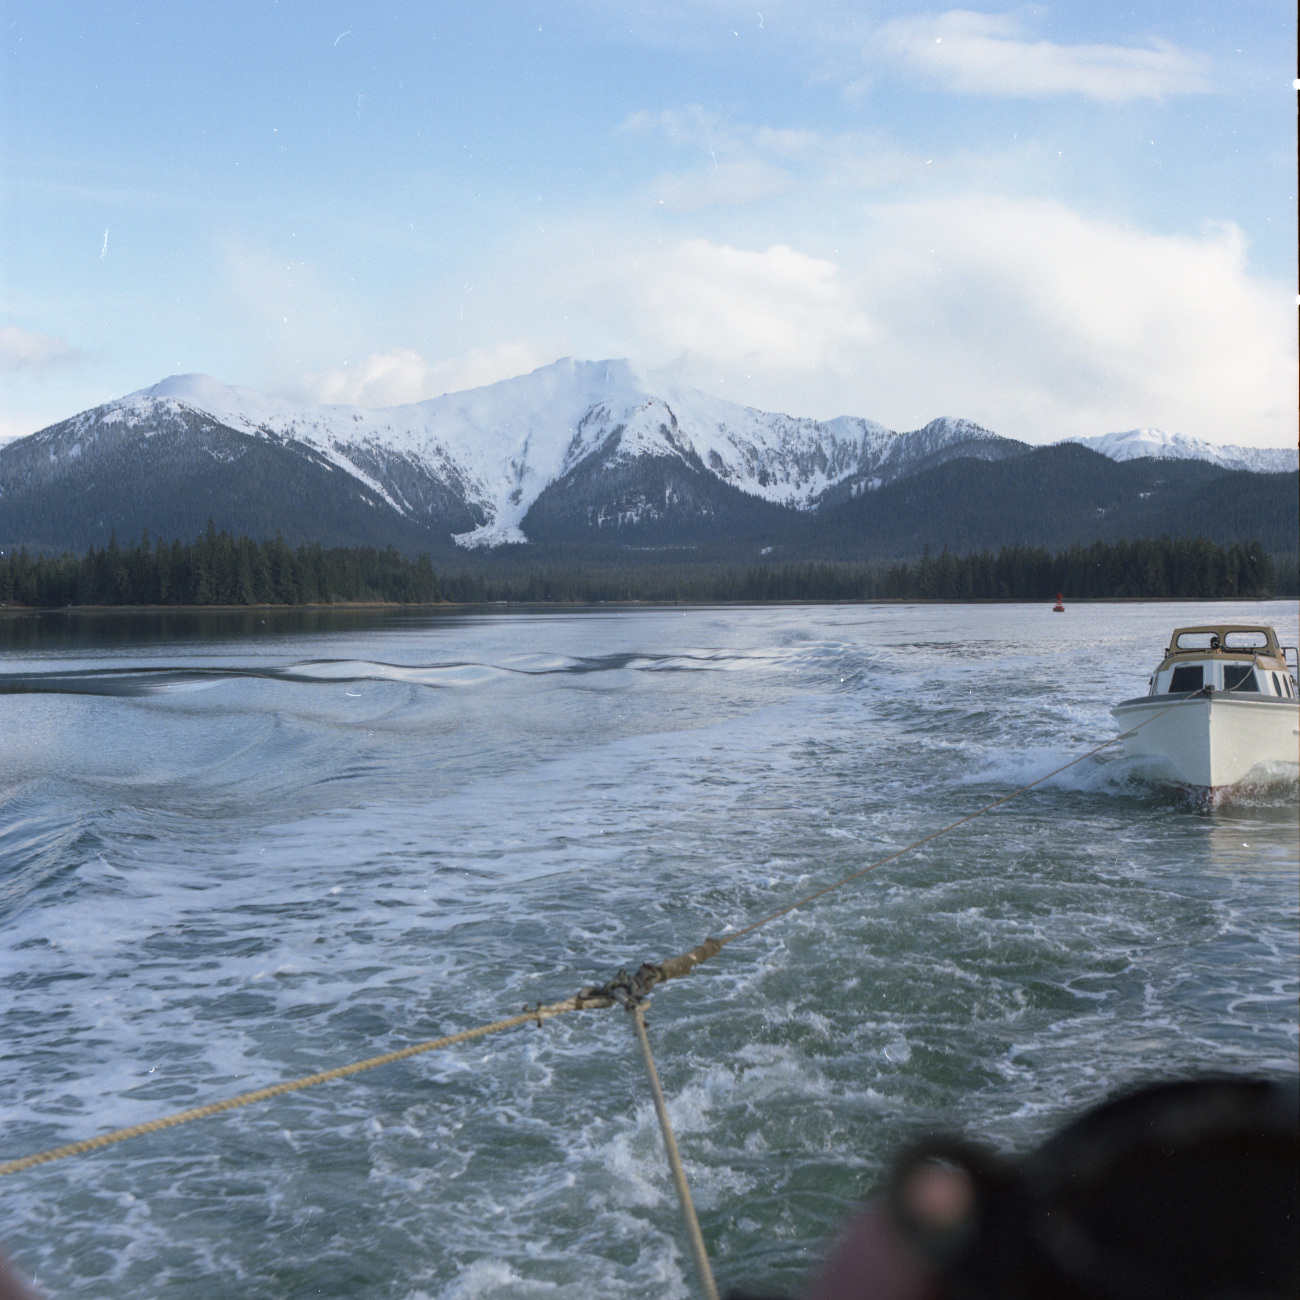 Towing the PATTON survey launch somewhere in Southeast Alaska